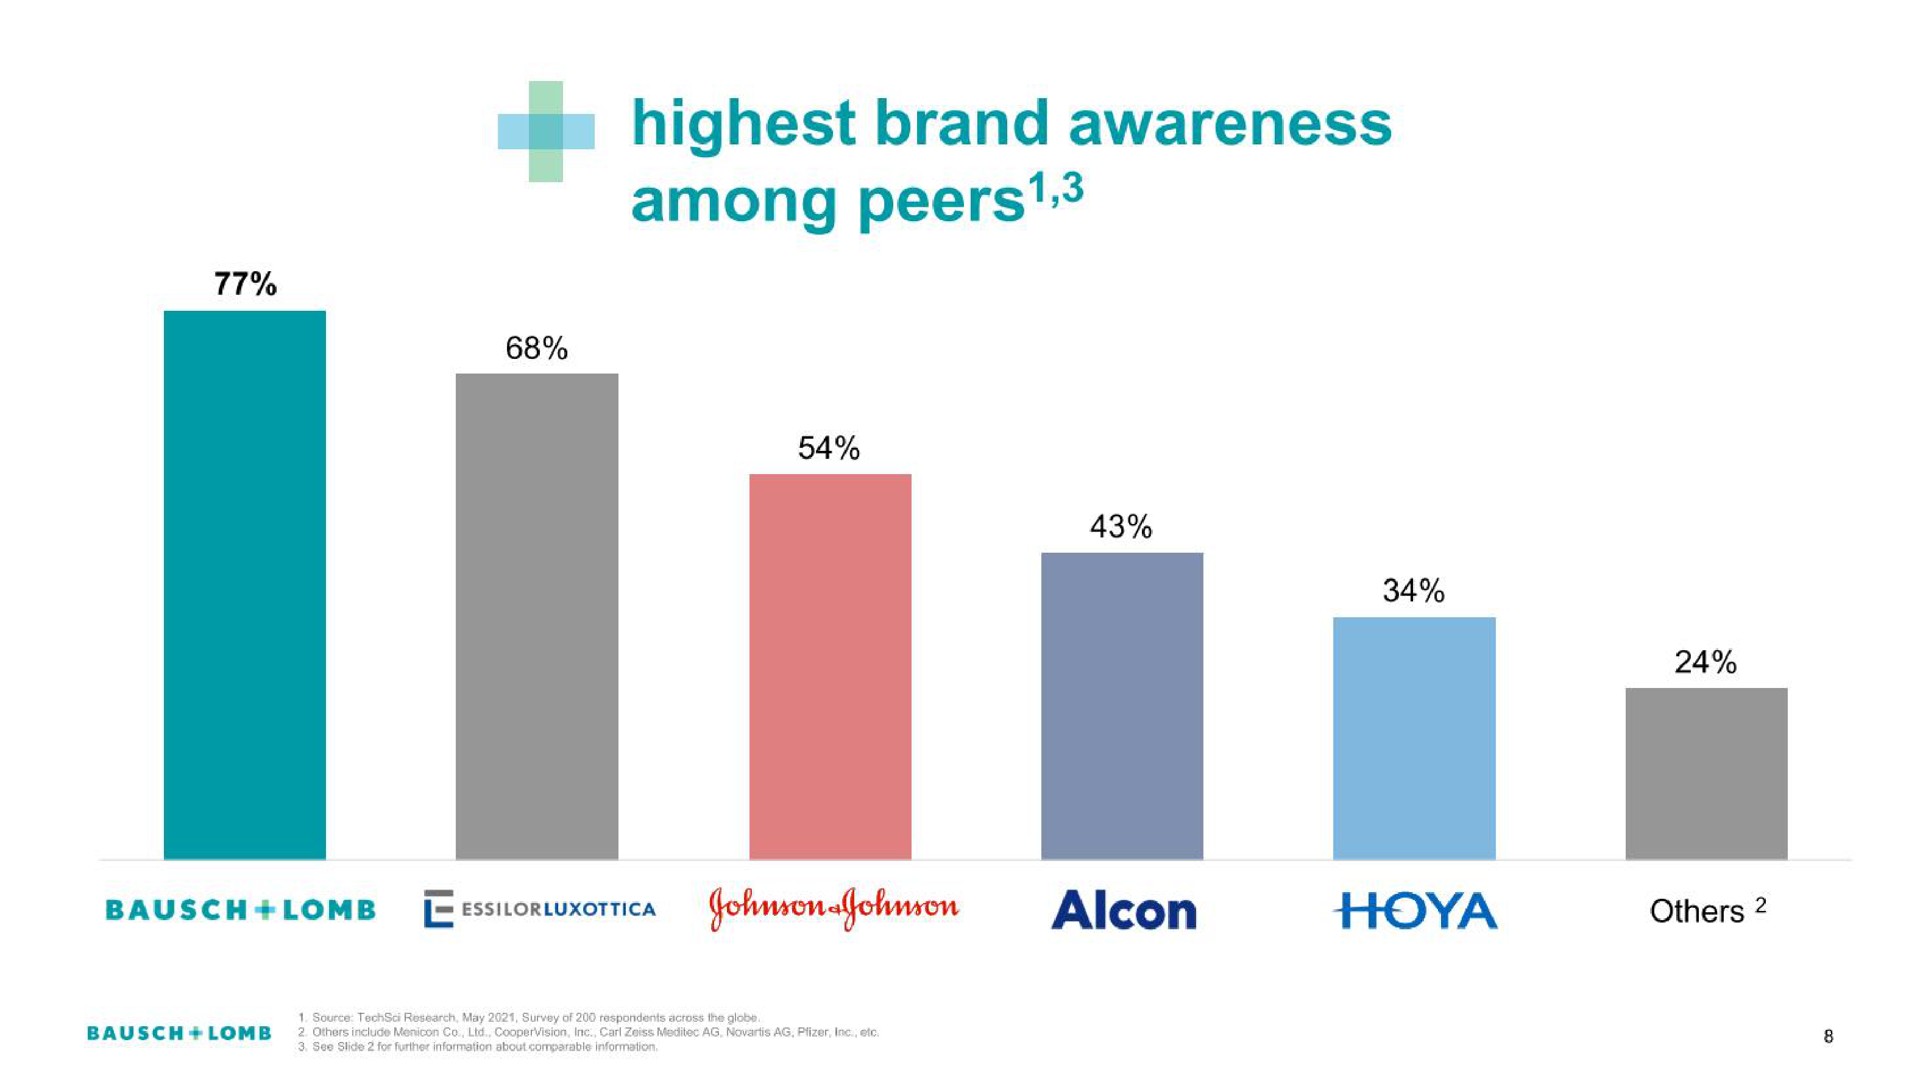 ame highest brand awareness among peers | Bausch+Lomb